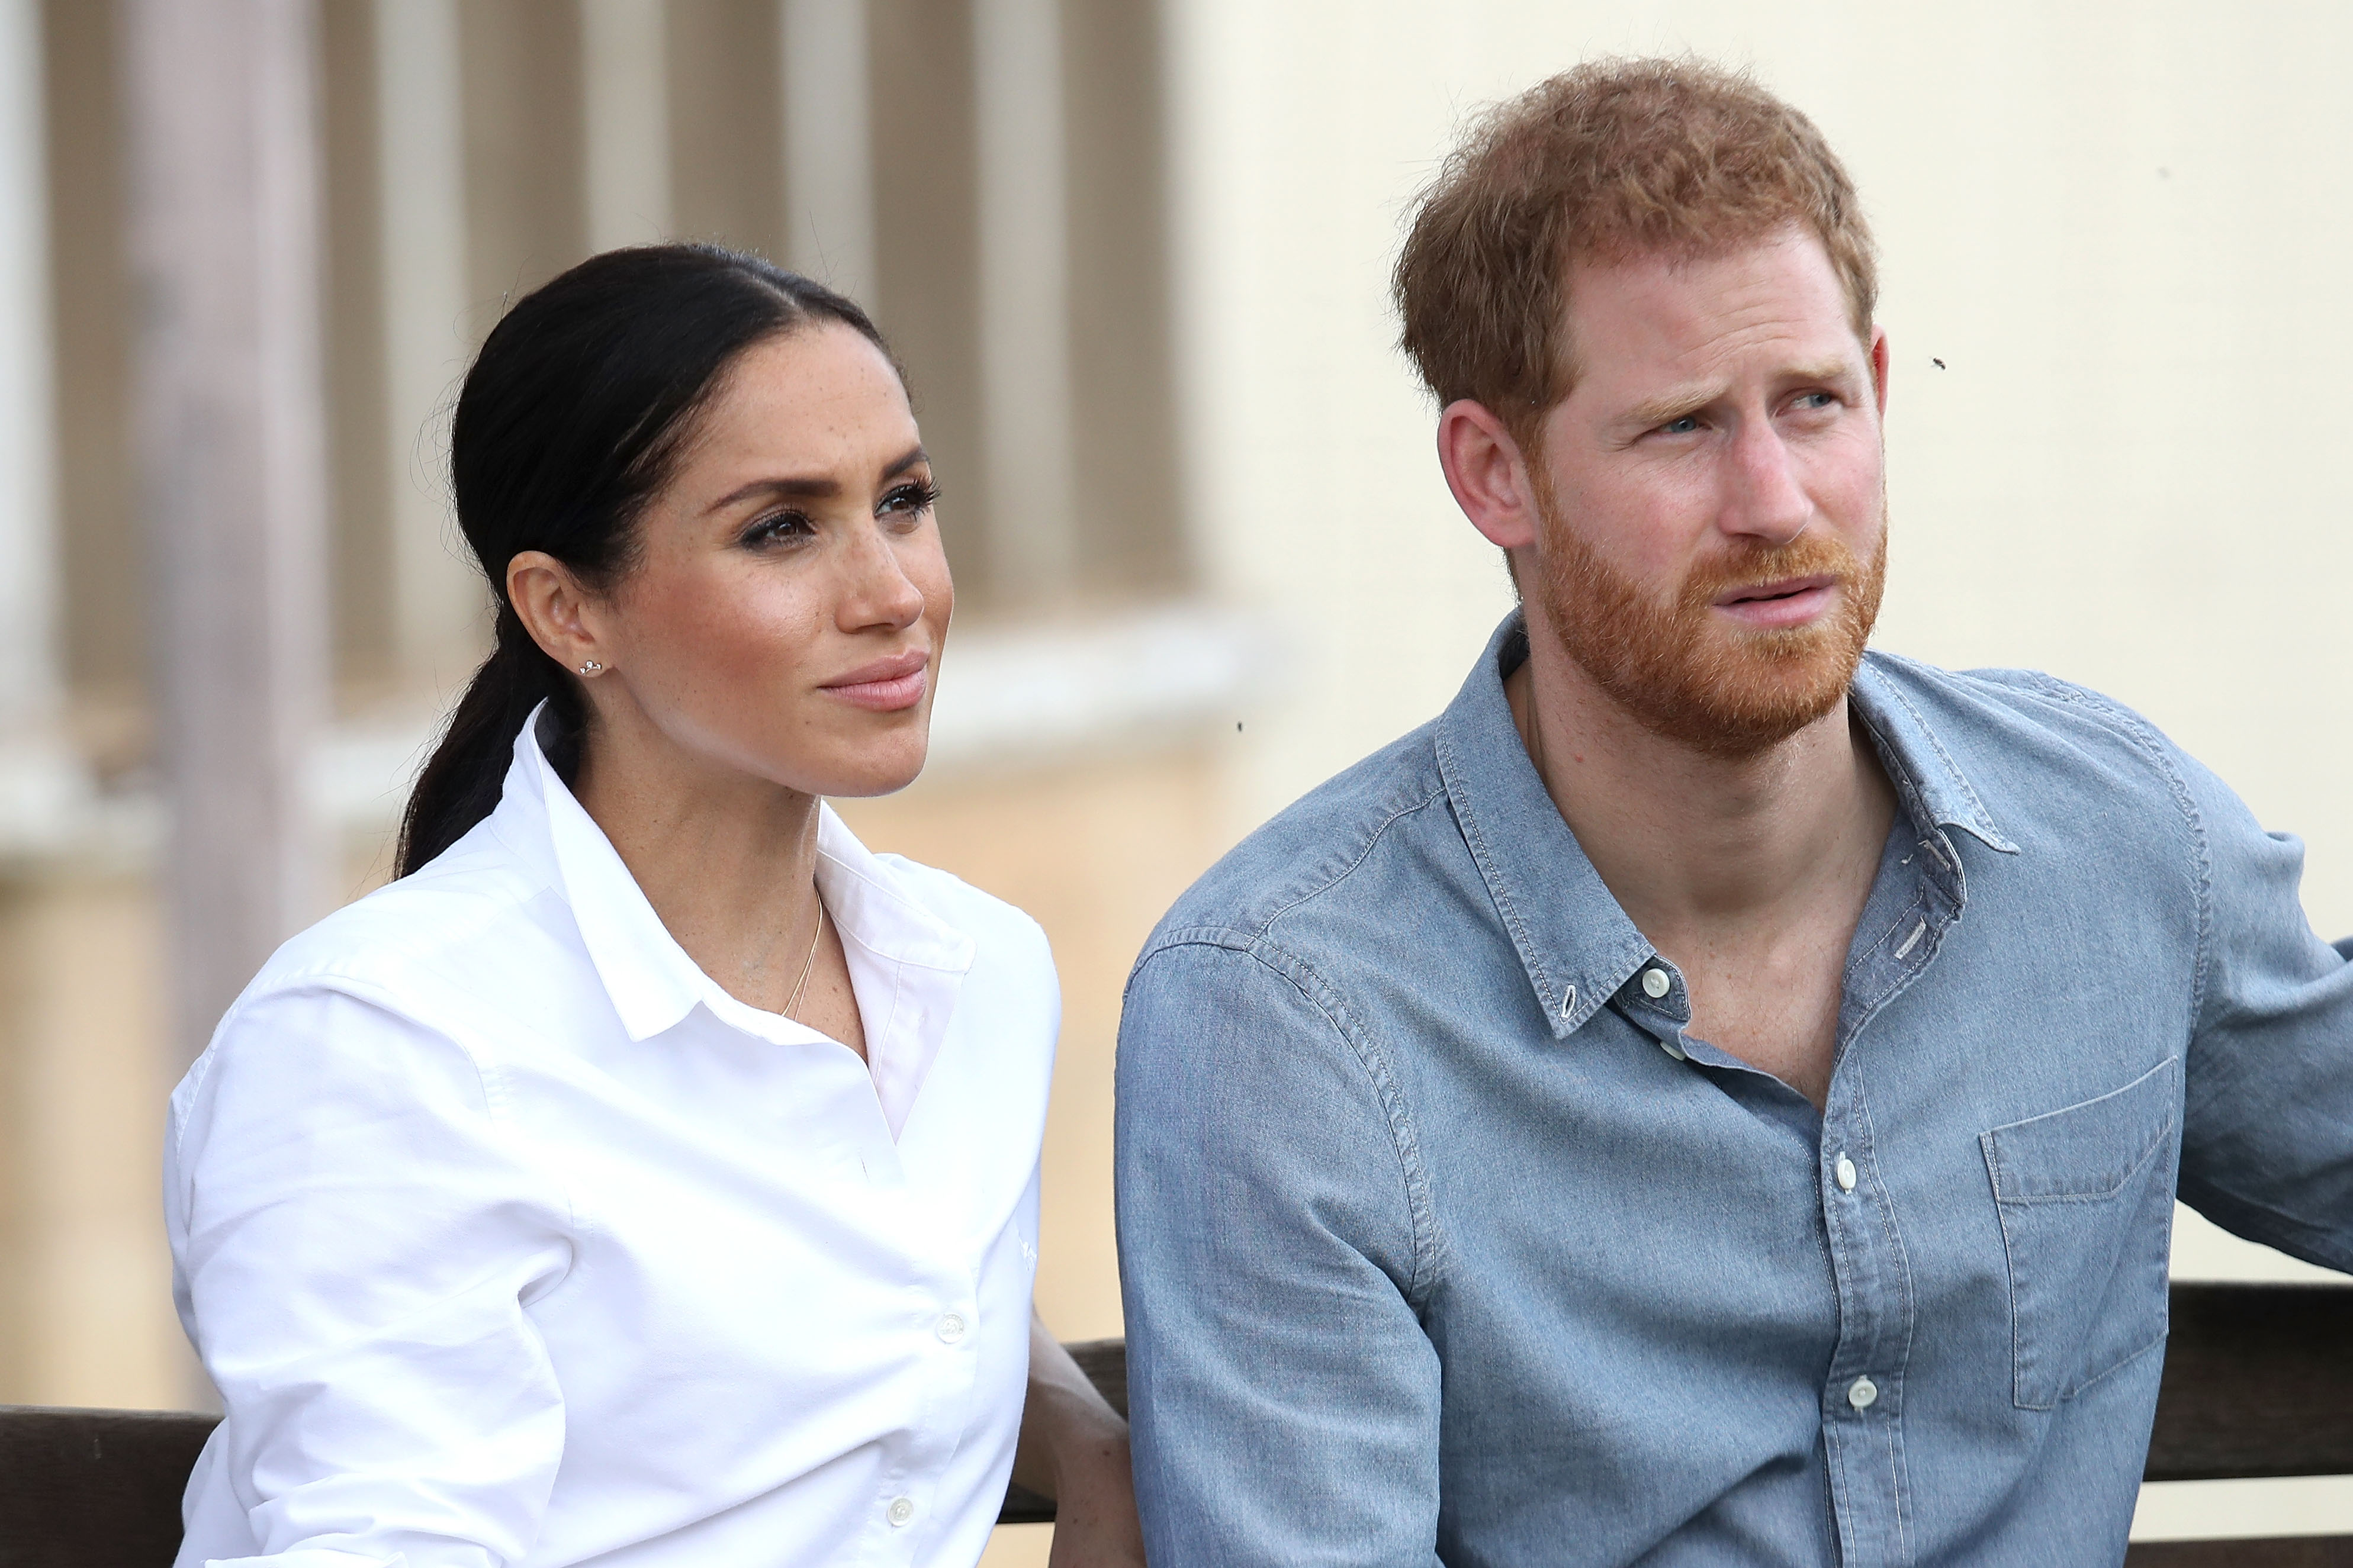 Meghan Markle and Prince Harry sit next to each other.